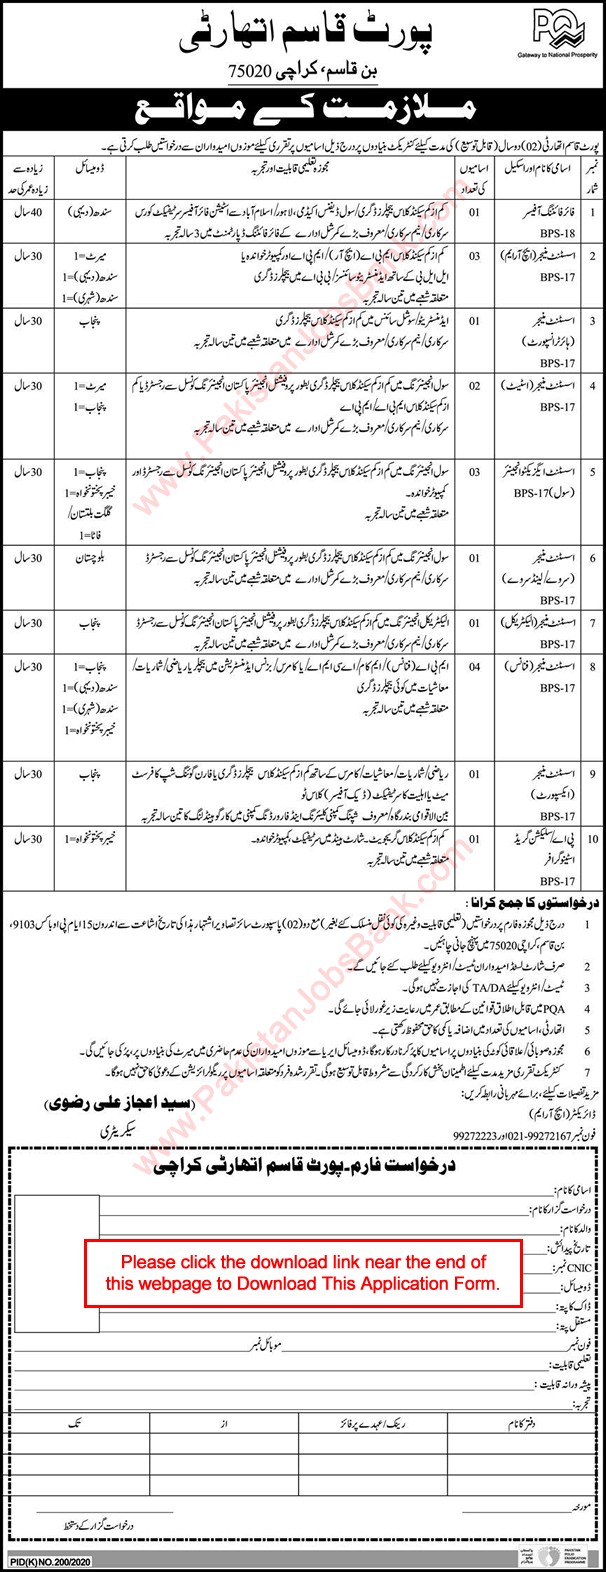 Port Qasim Authority Karachi Jobs 2020 July PQA Application Form Assistant Managers & Others Latest